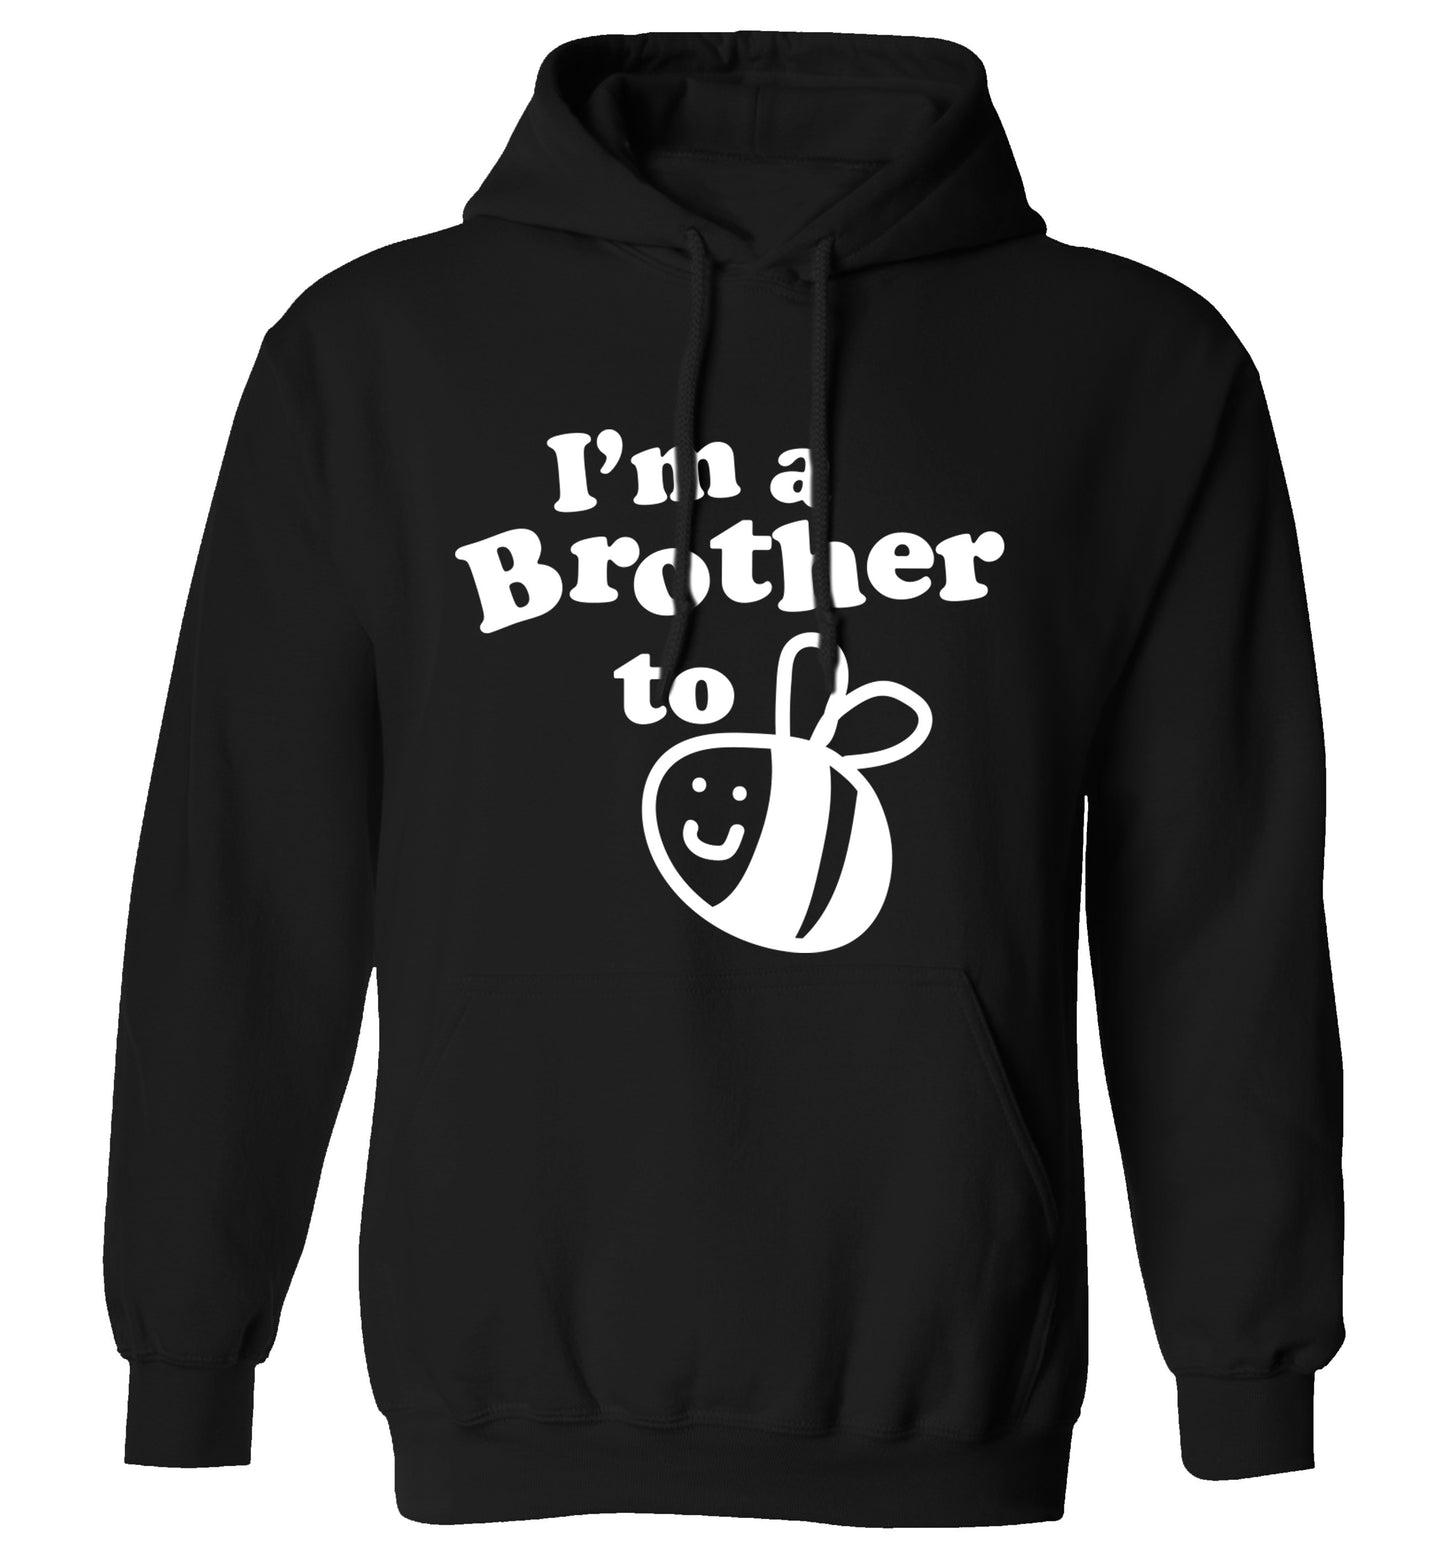 I'm a brother to be adults unisex black hoodie 2XL